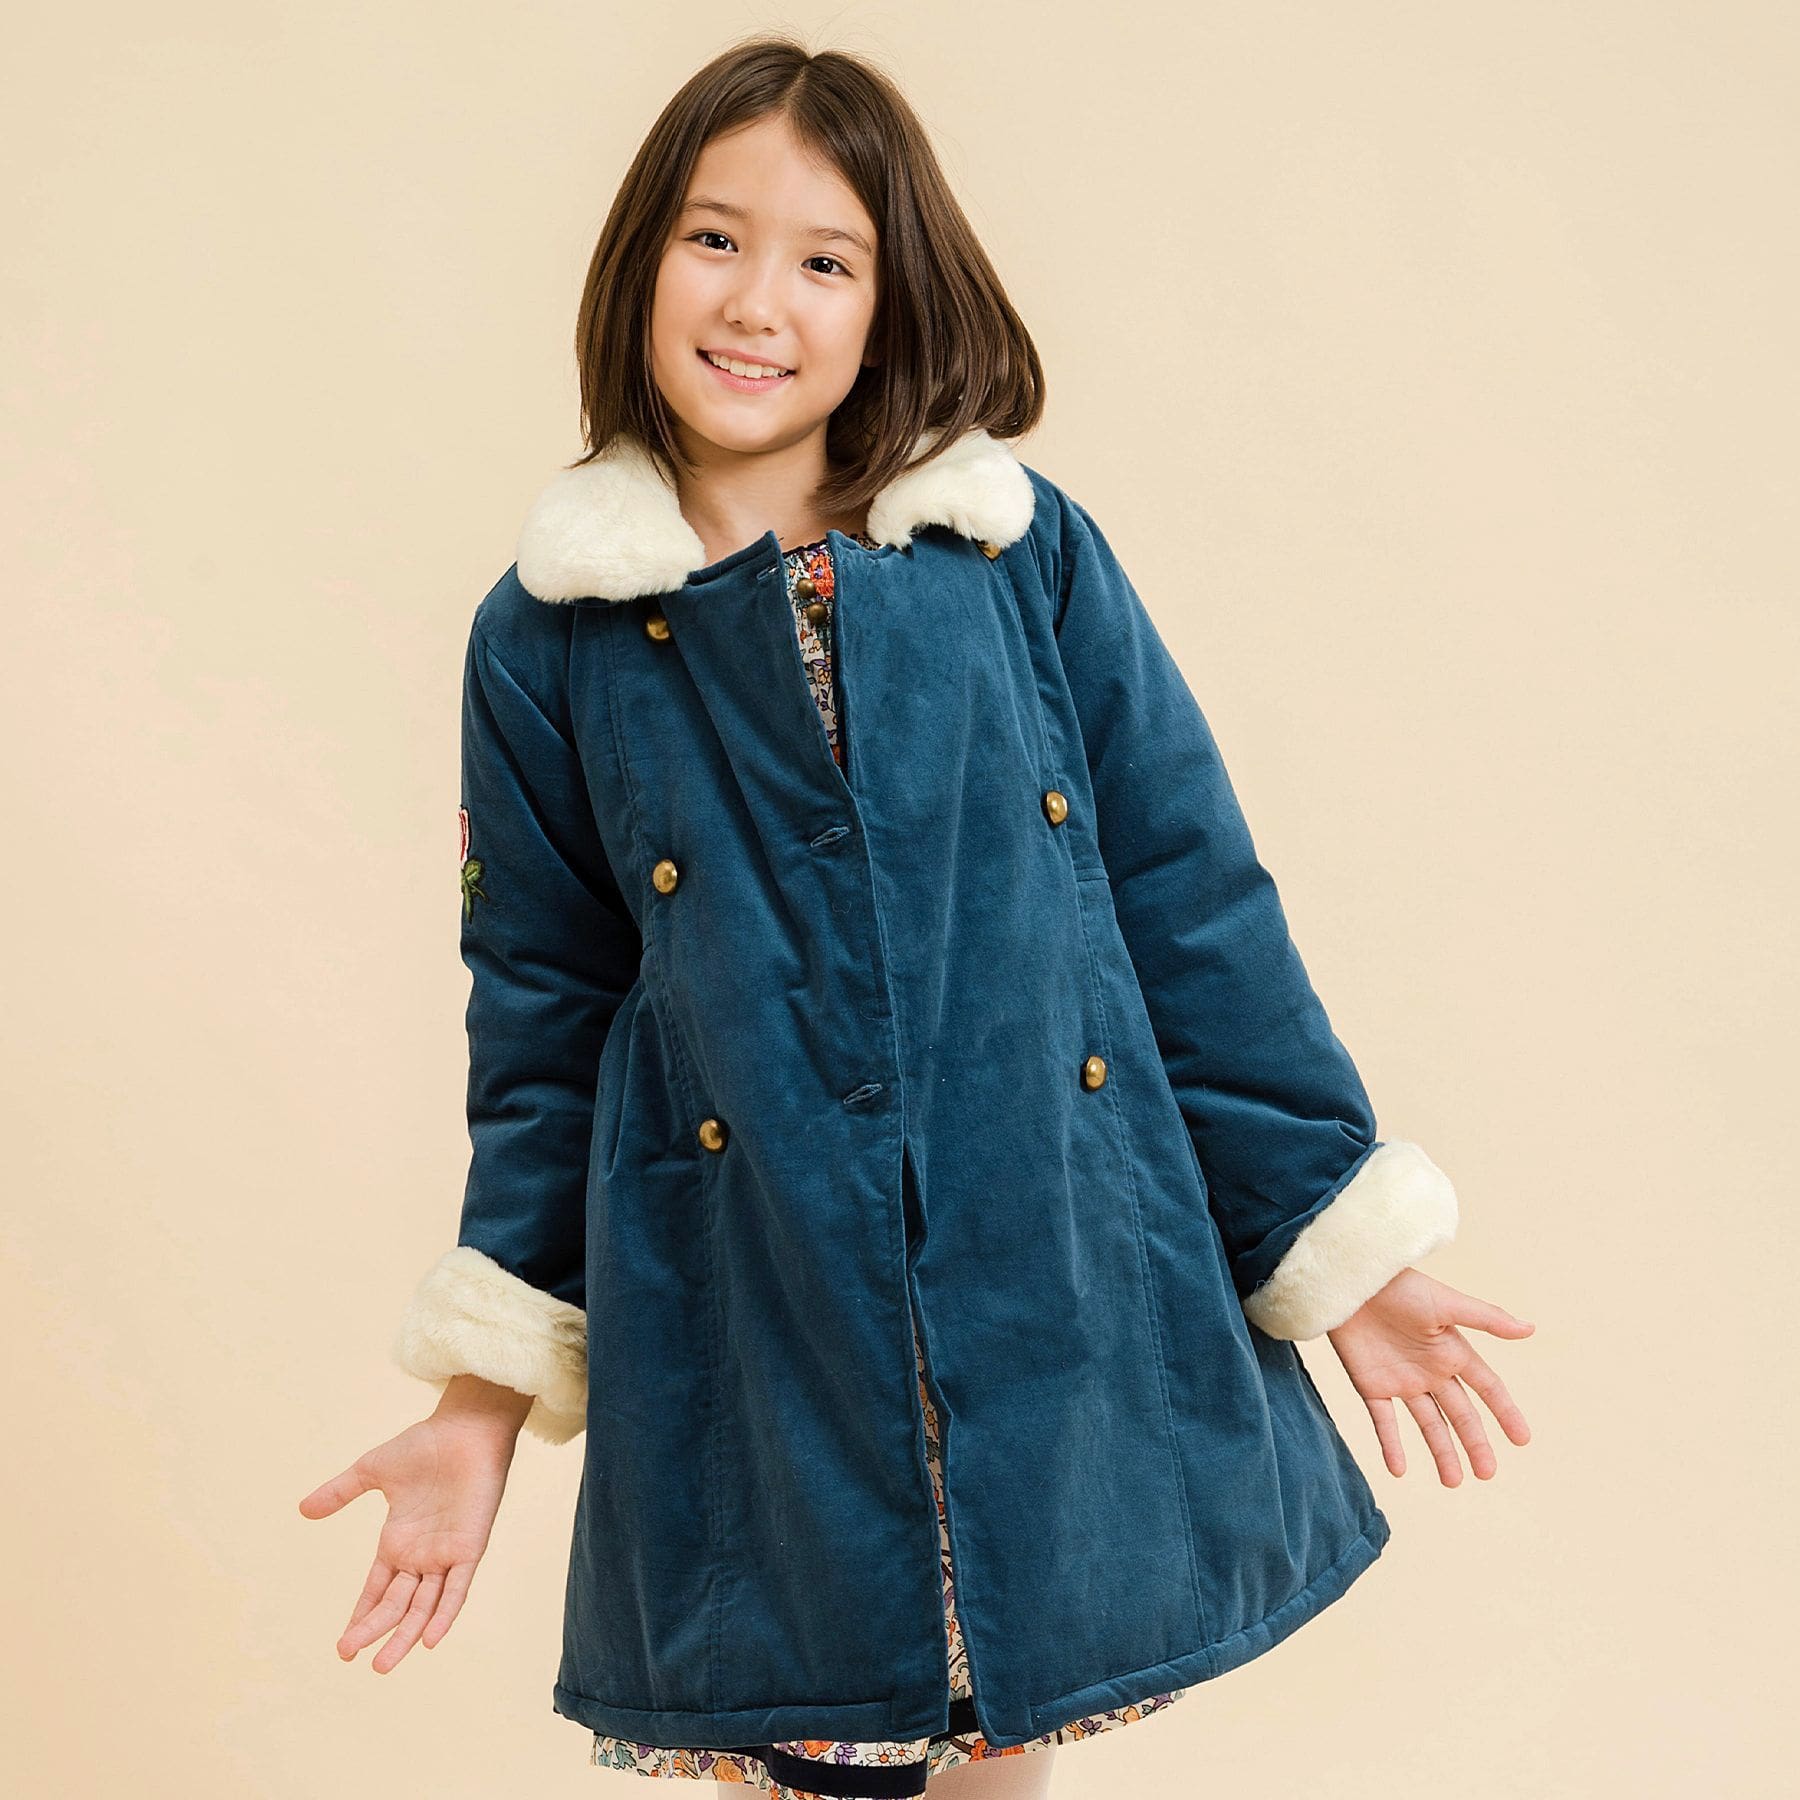 Velvet coat. blue green duck millerais with beige faux fur collar for girls and young women from the children's fashion brand LA FAUTE A VOLTAIRE